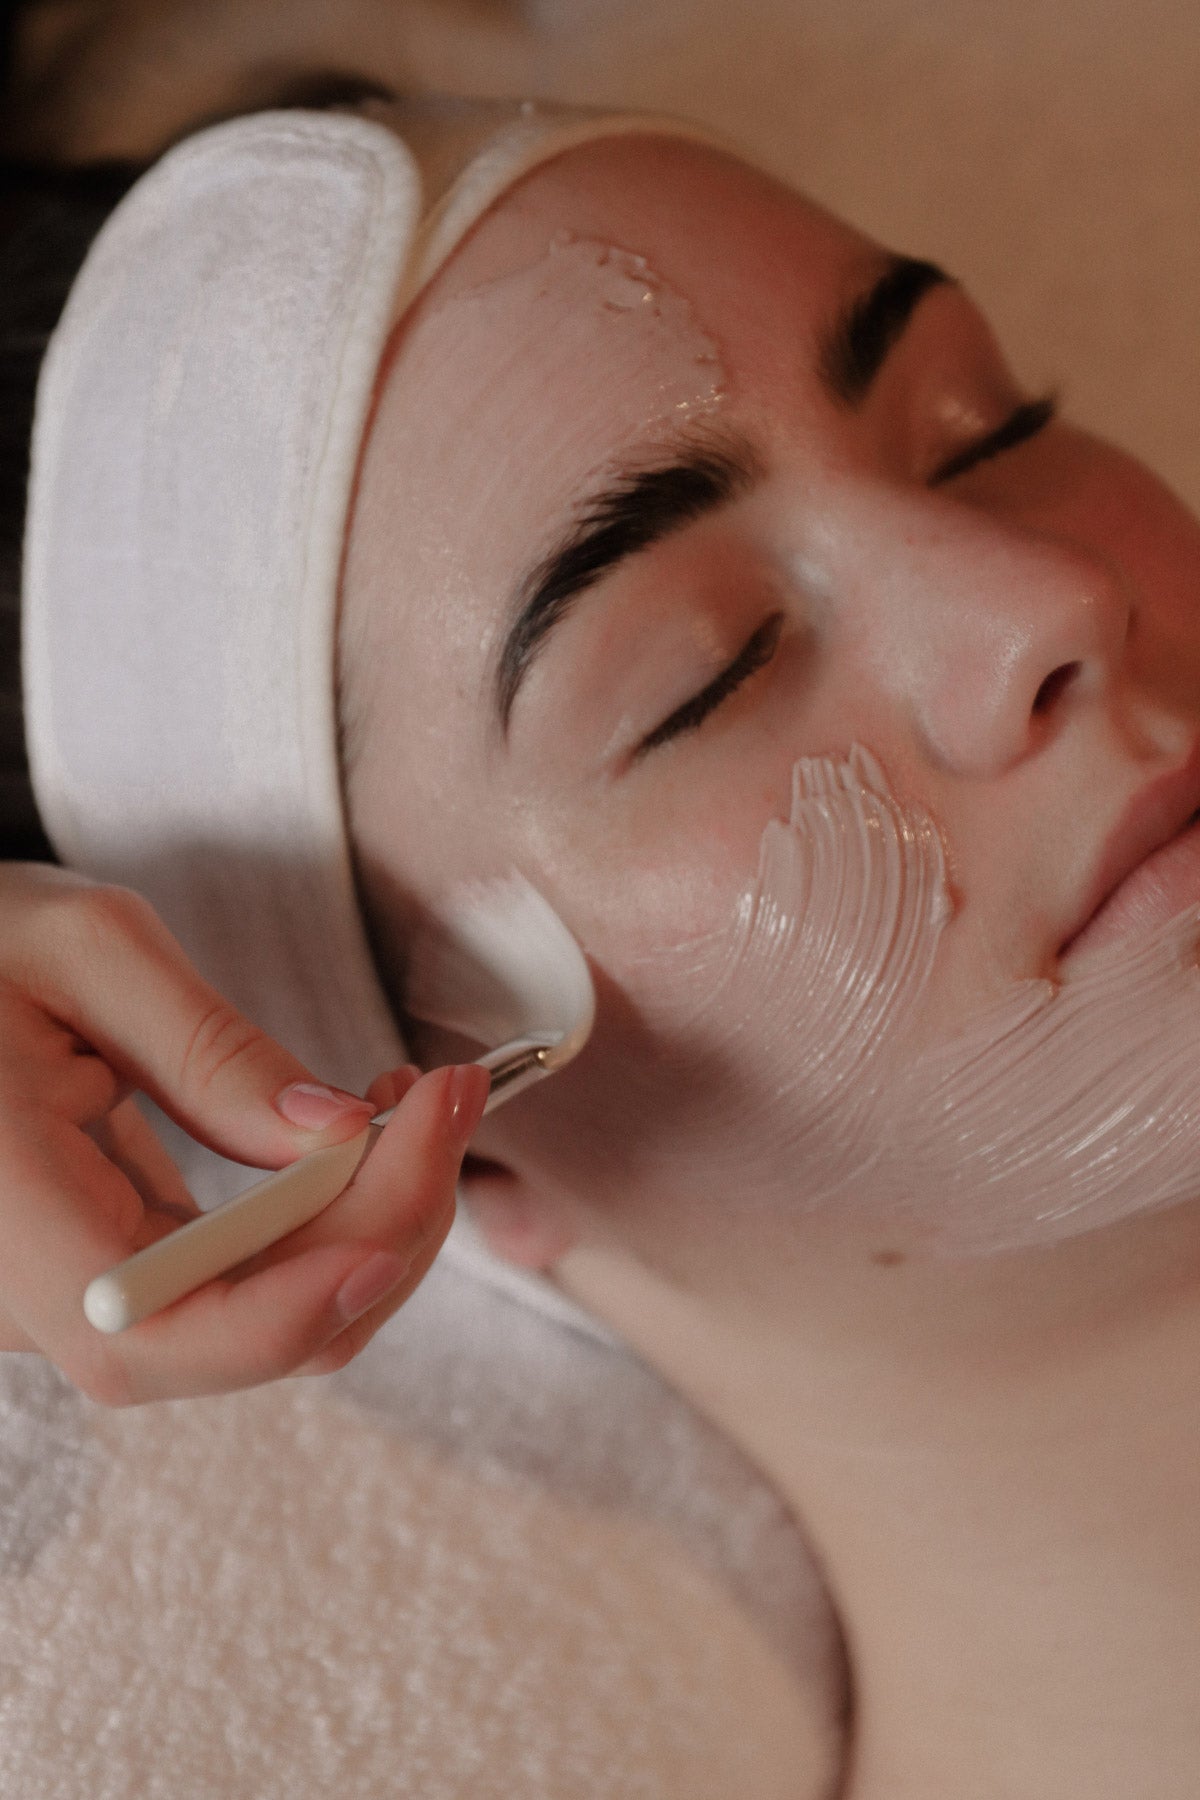 Discover the Emma Lewisham glow at The Facialist